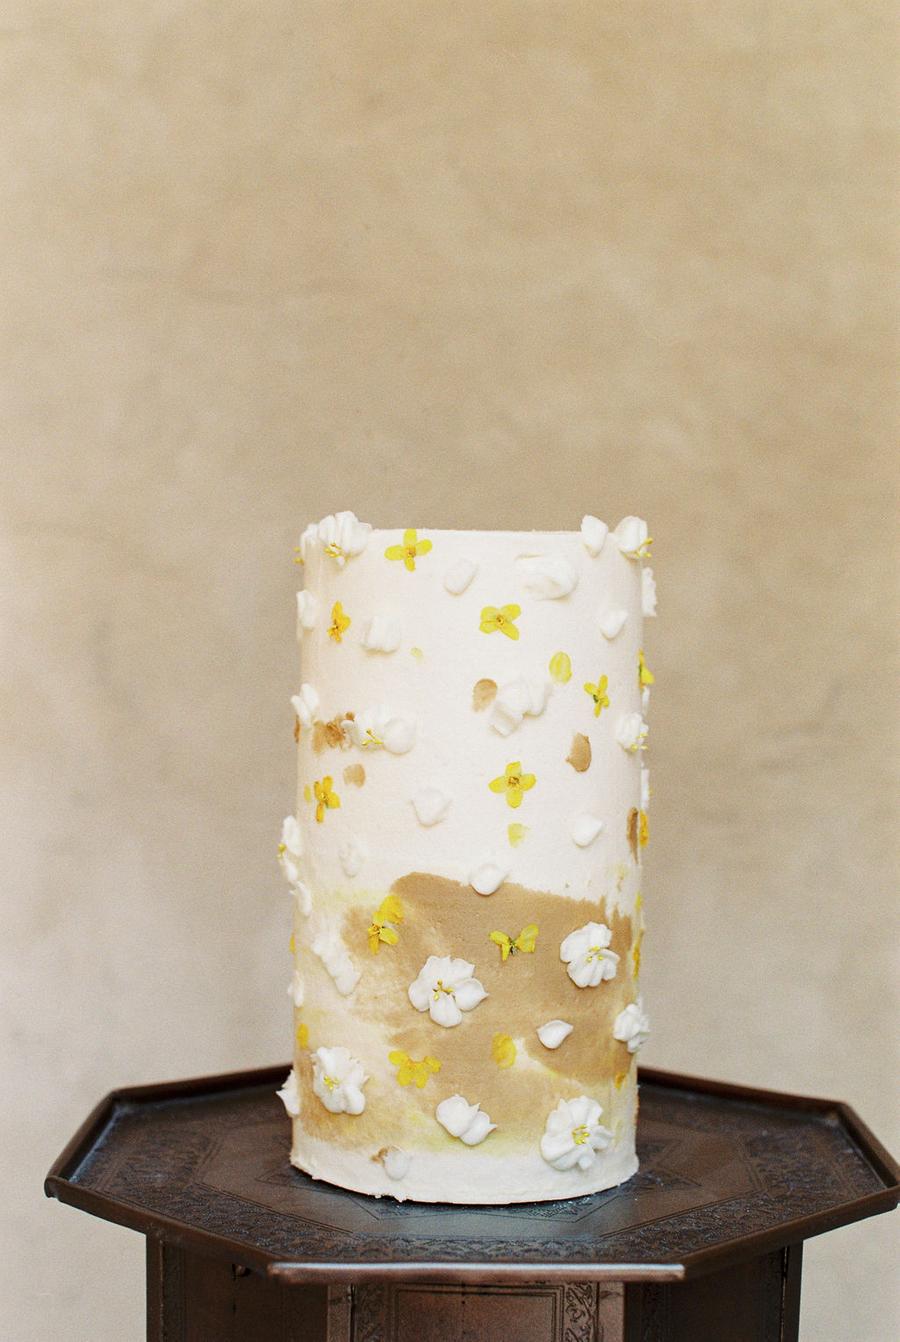 The wedding cake was tall, in white and mustard and with sugar blooms